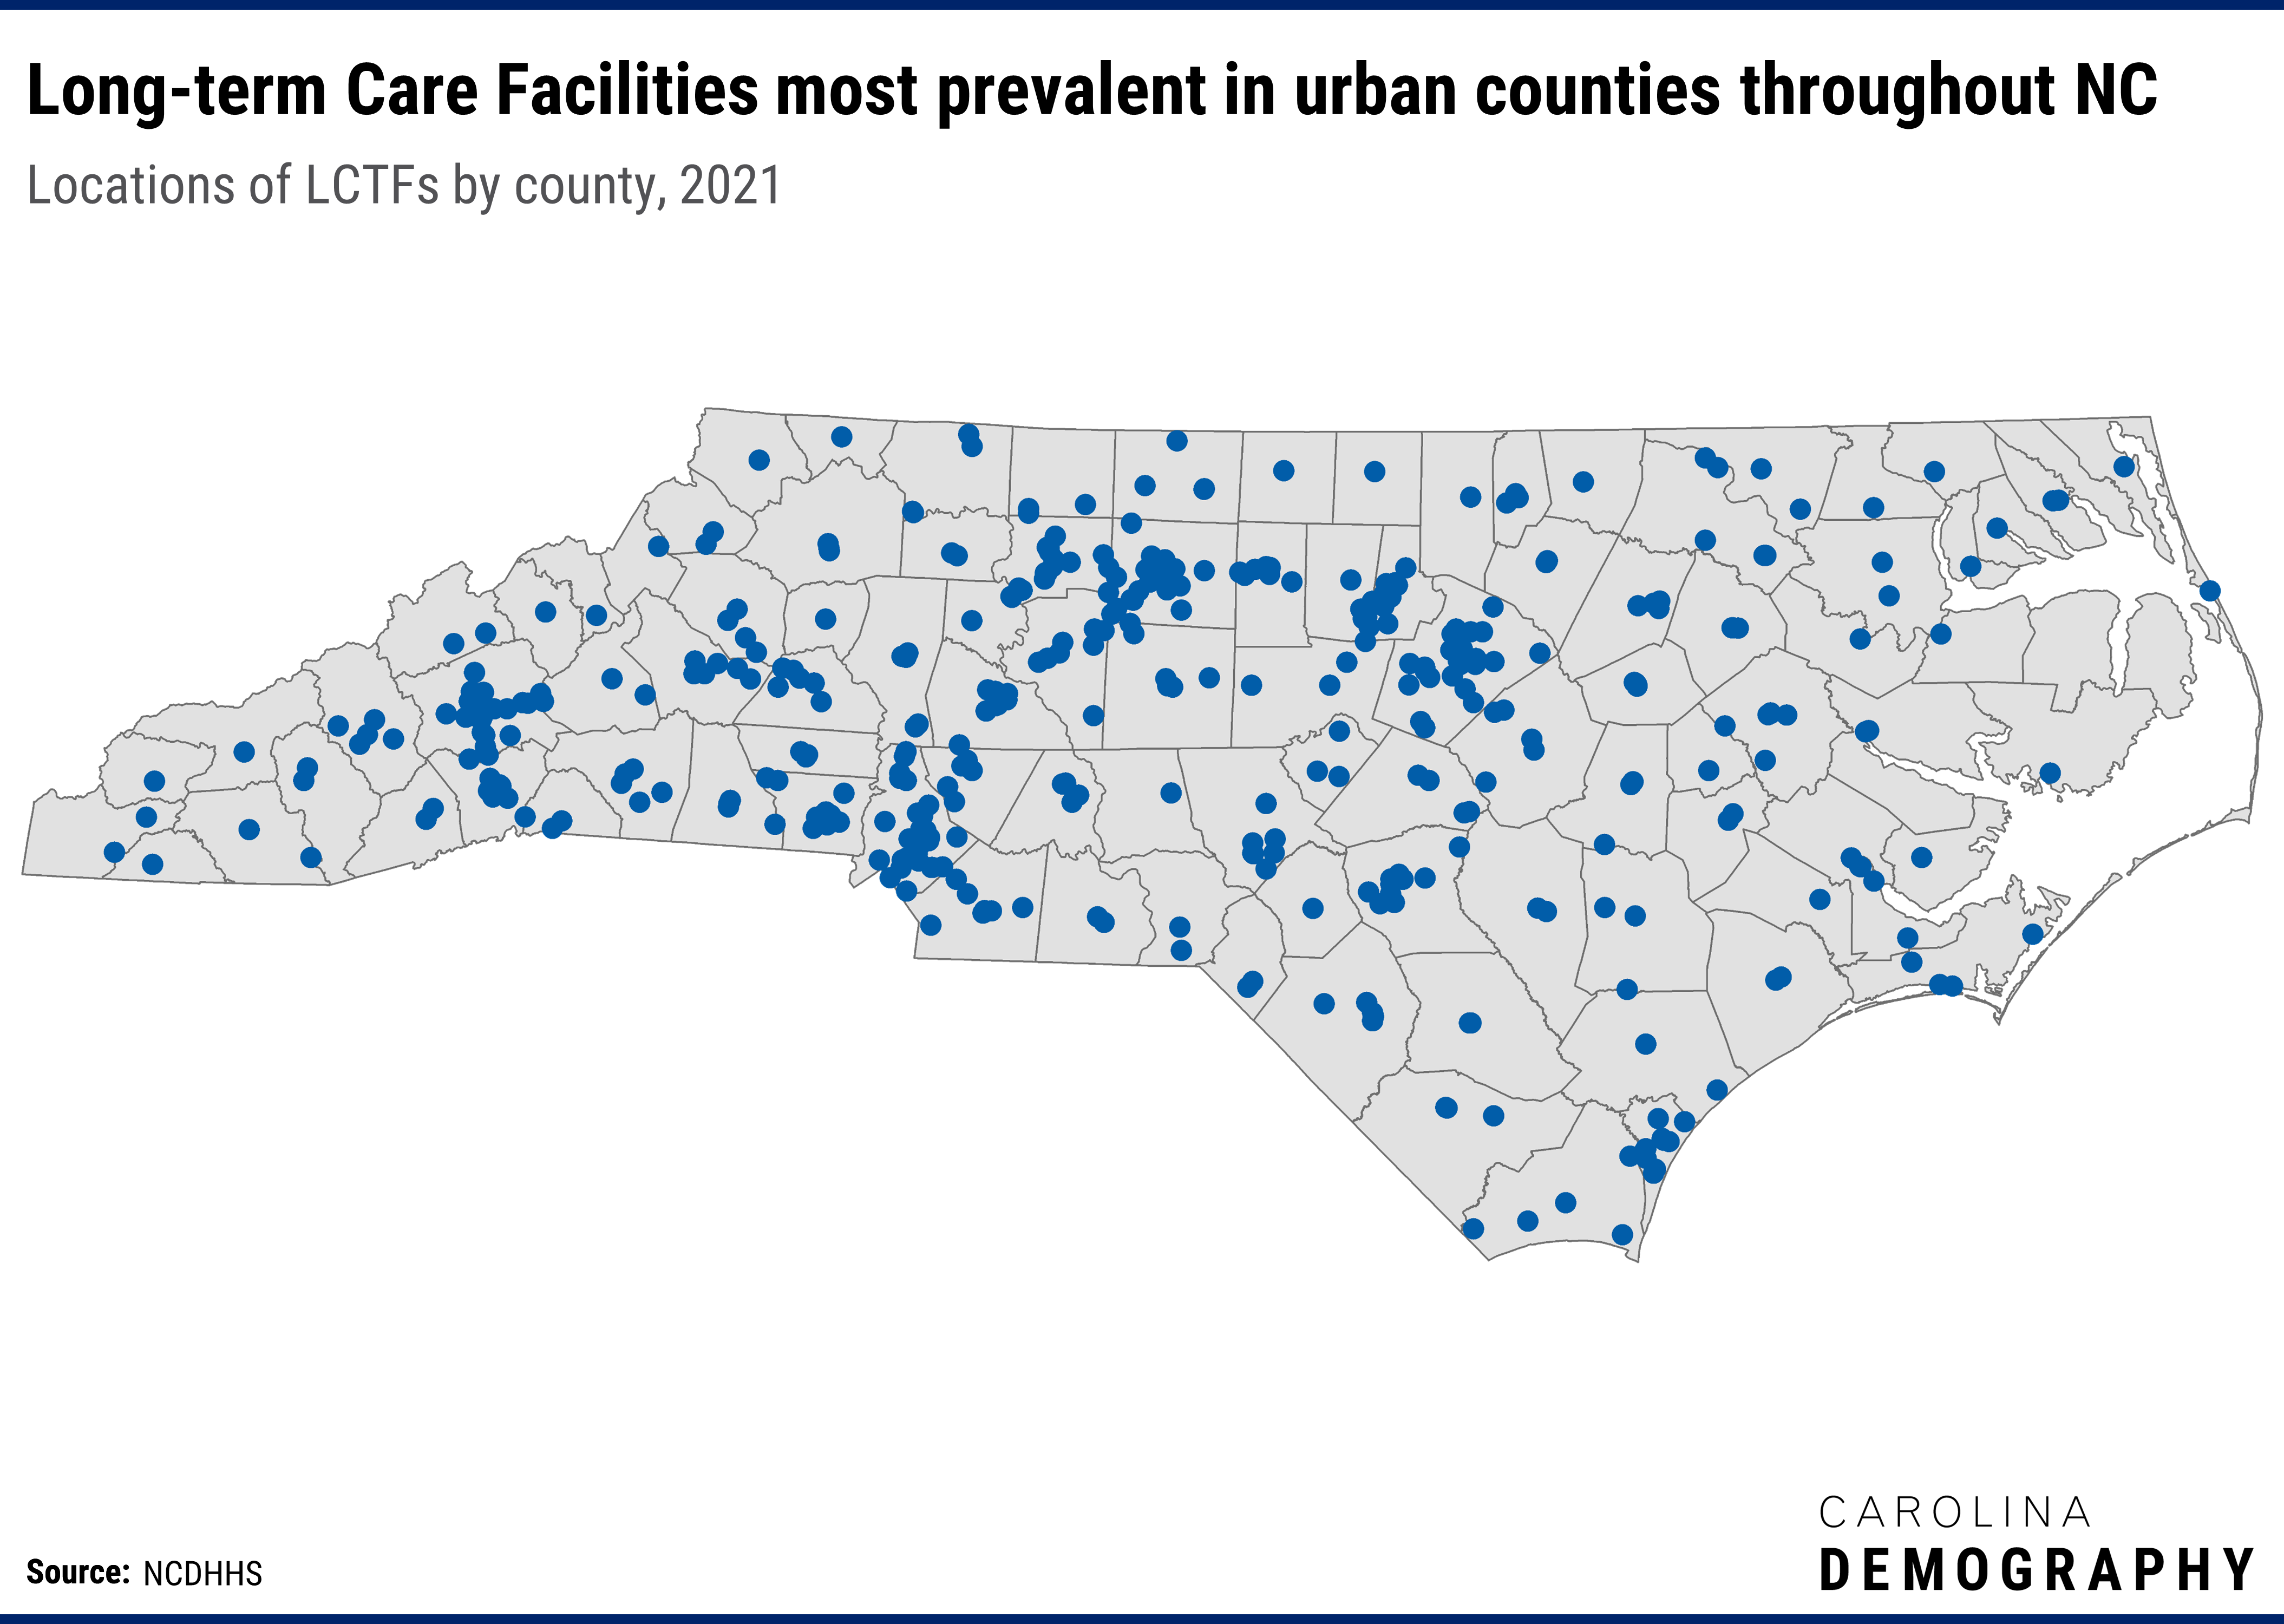 Map of NC showing locations of long term care facilities across the state